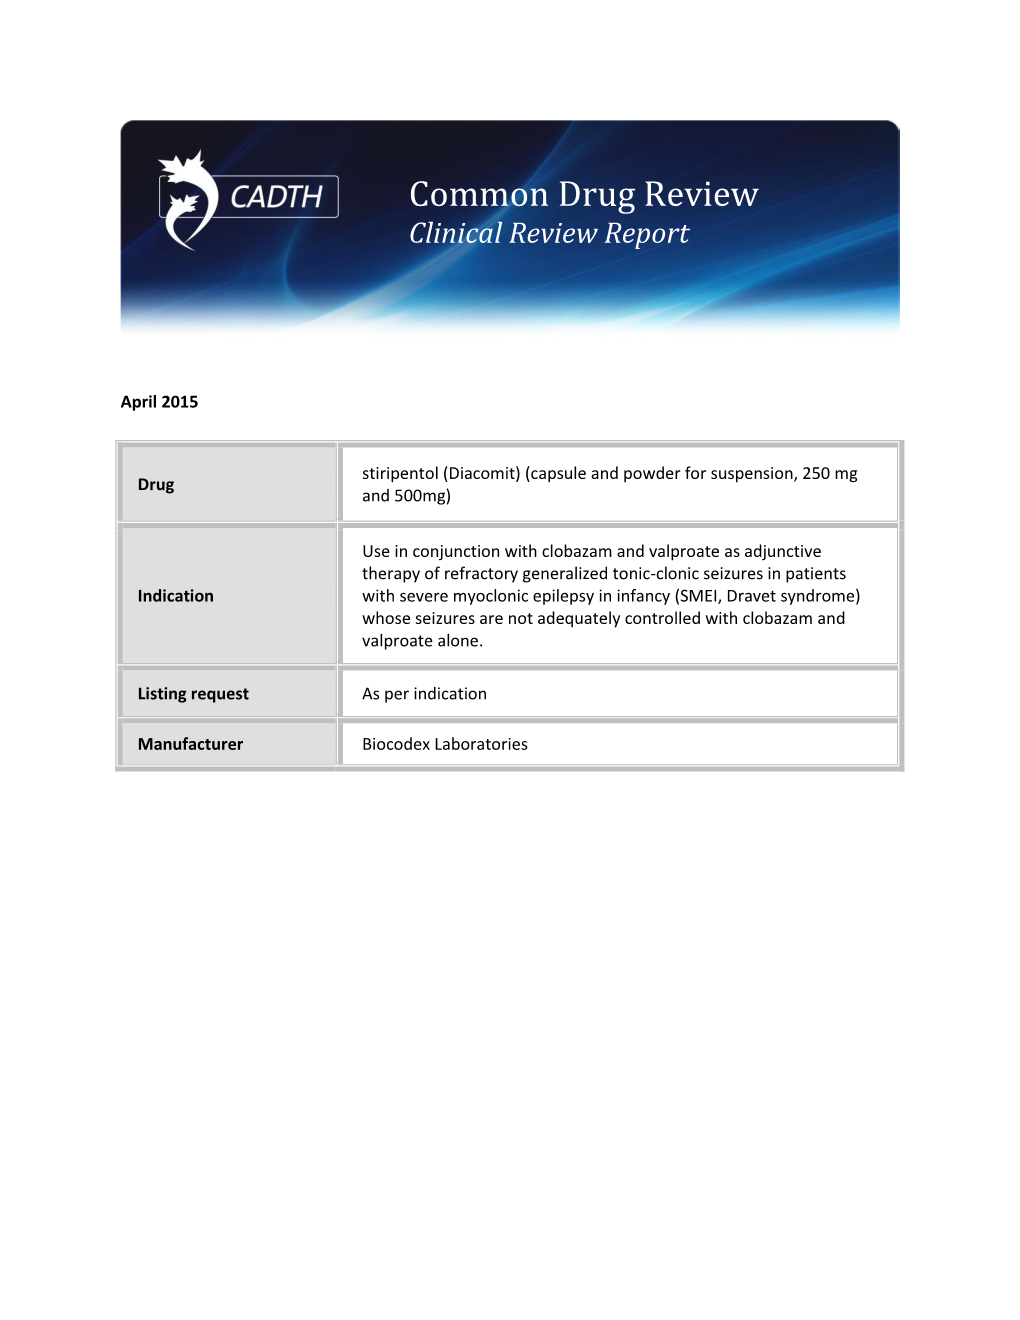 CDR Clinical Review Report on Diacomit (Stiripentol)